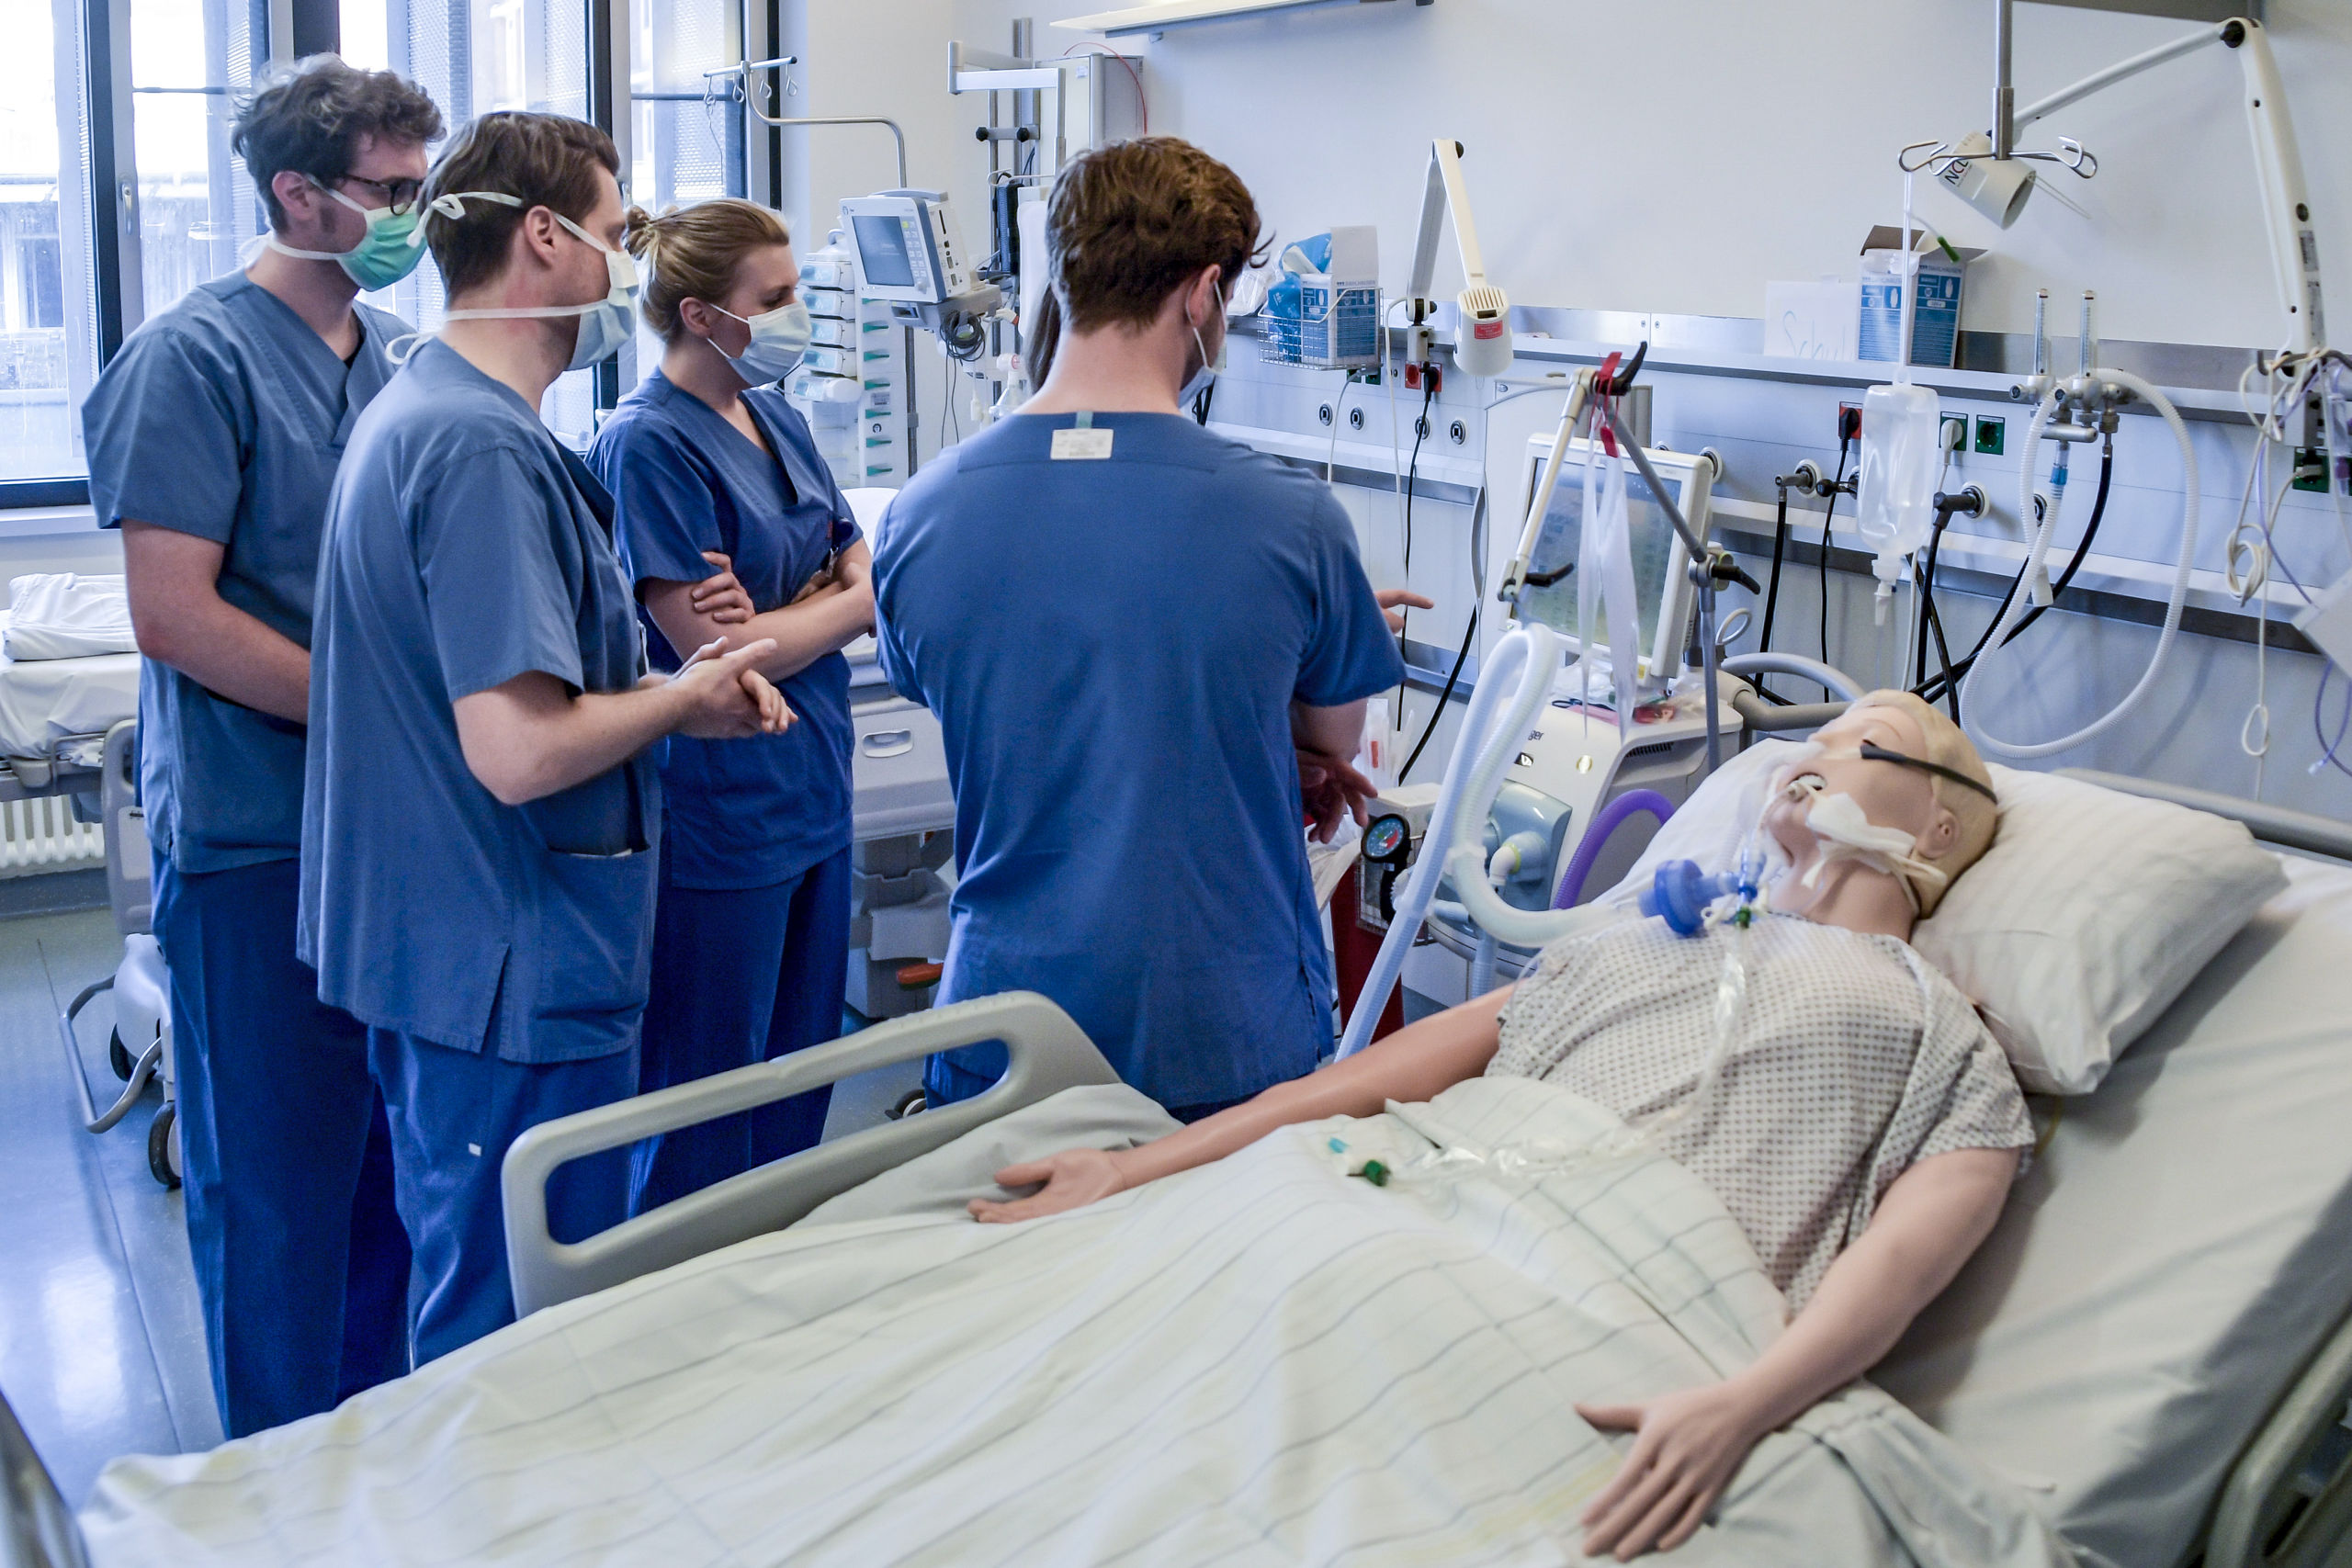 2020-03-25 16:09:26 Hospital doctors are instructed to handle a ventilator at the Universitaetsklinikum Eppendorf in Hamburg, on March 25, 2020. Currently ten Covid-19/ Corona patients are treated in the hospital. Axel Heimken / POOL / AFP